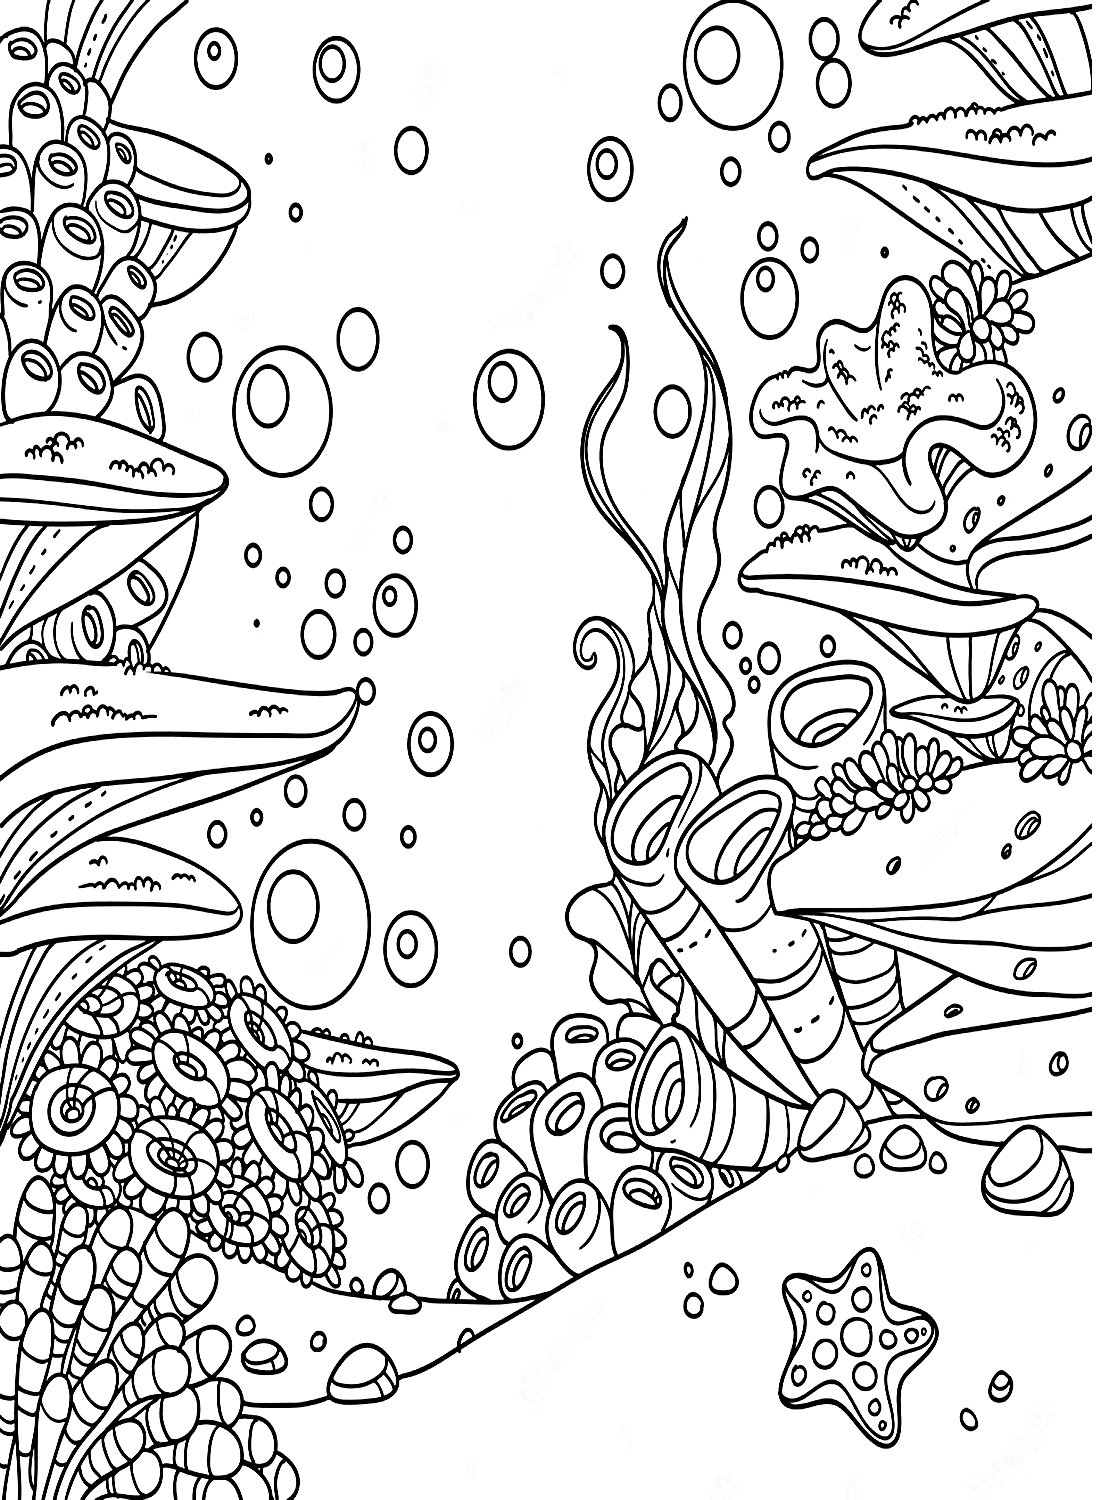 Coral reef Coloring Page